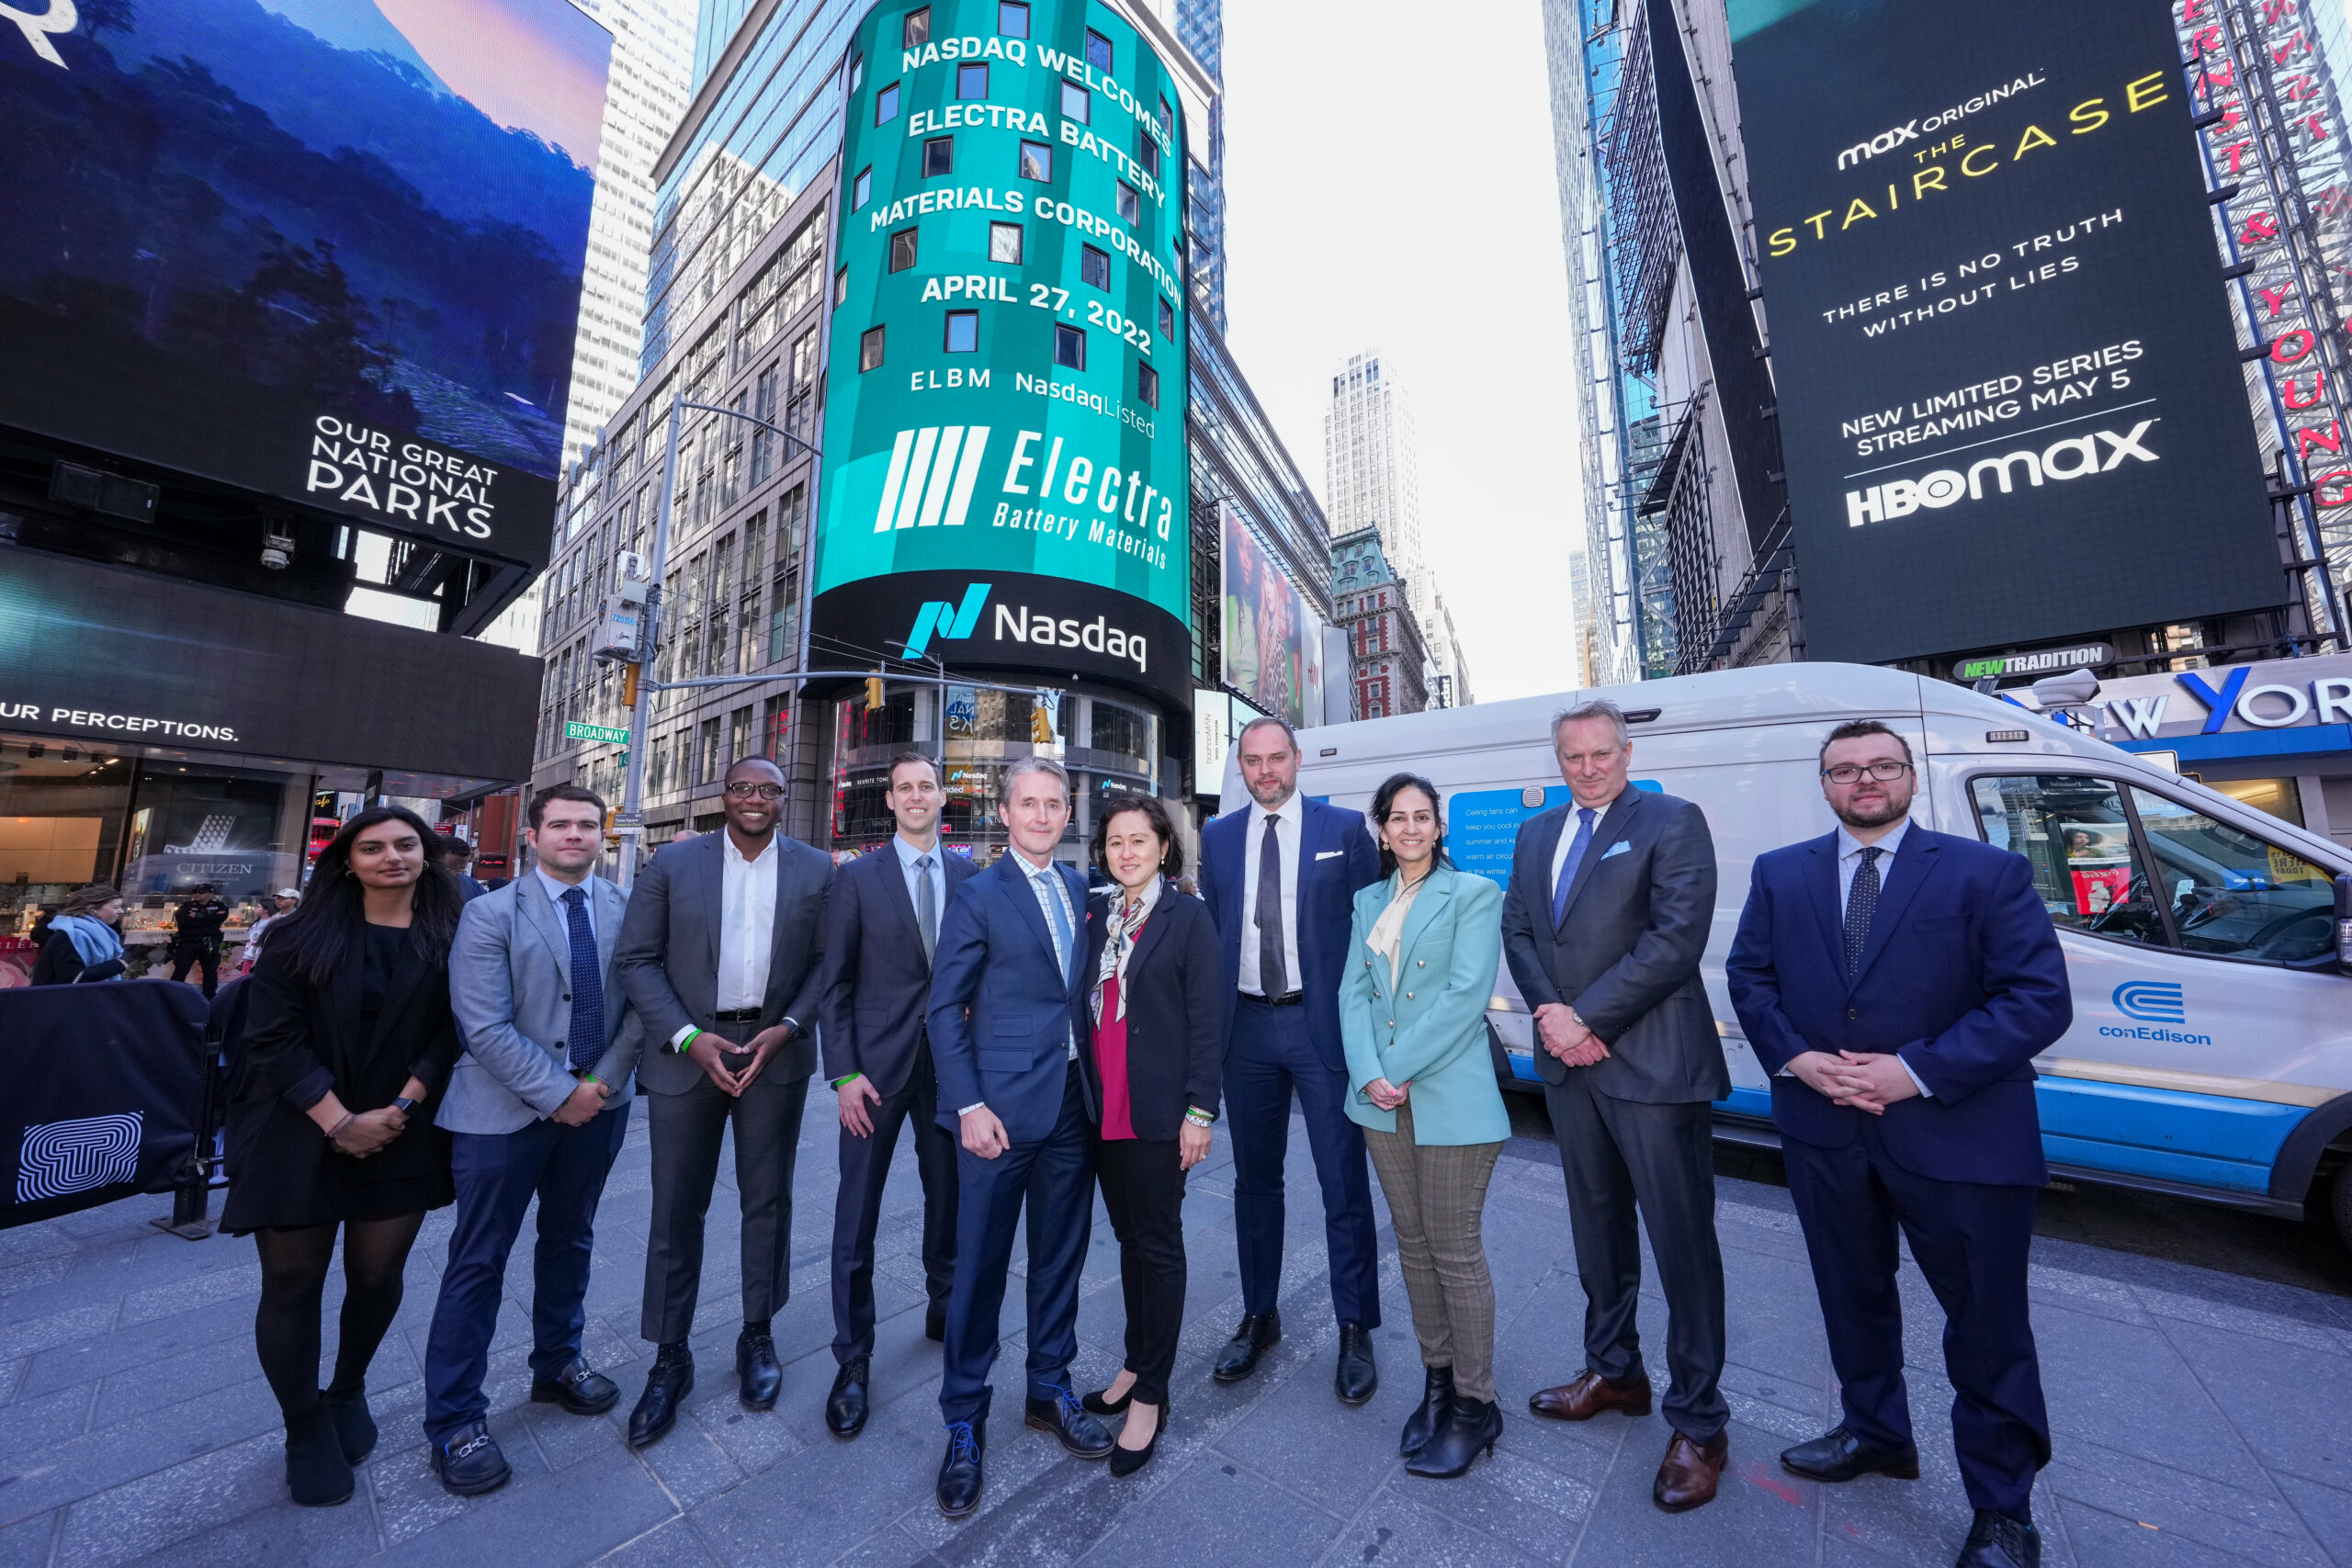 Electra Management and Guests outside of Nasdaq MarketSite